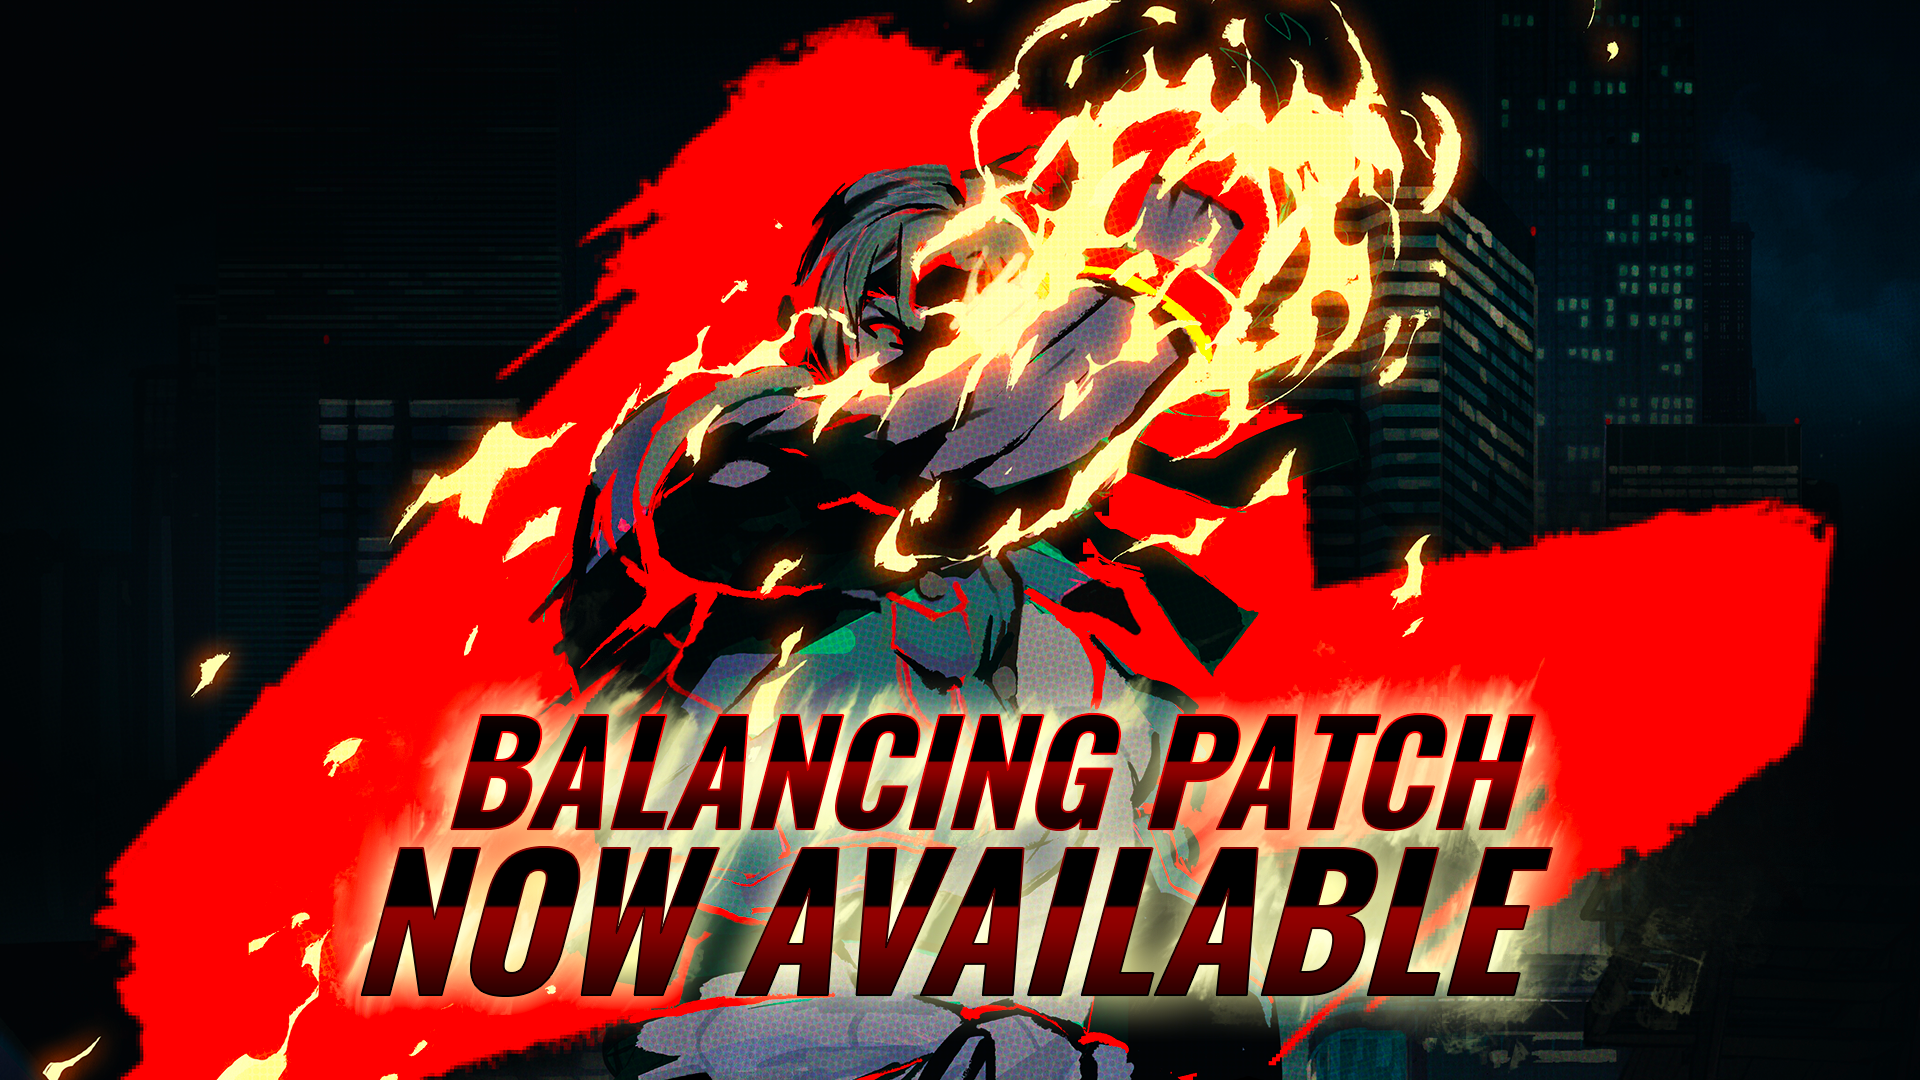 Streets of Rage 4 new balancing patch now available